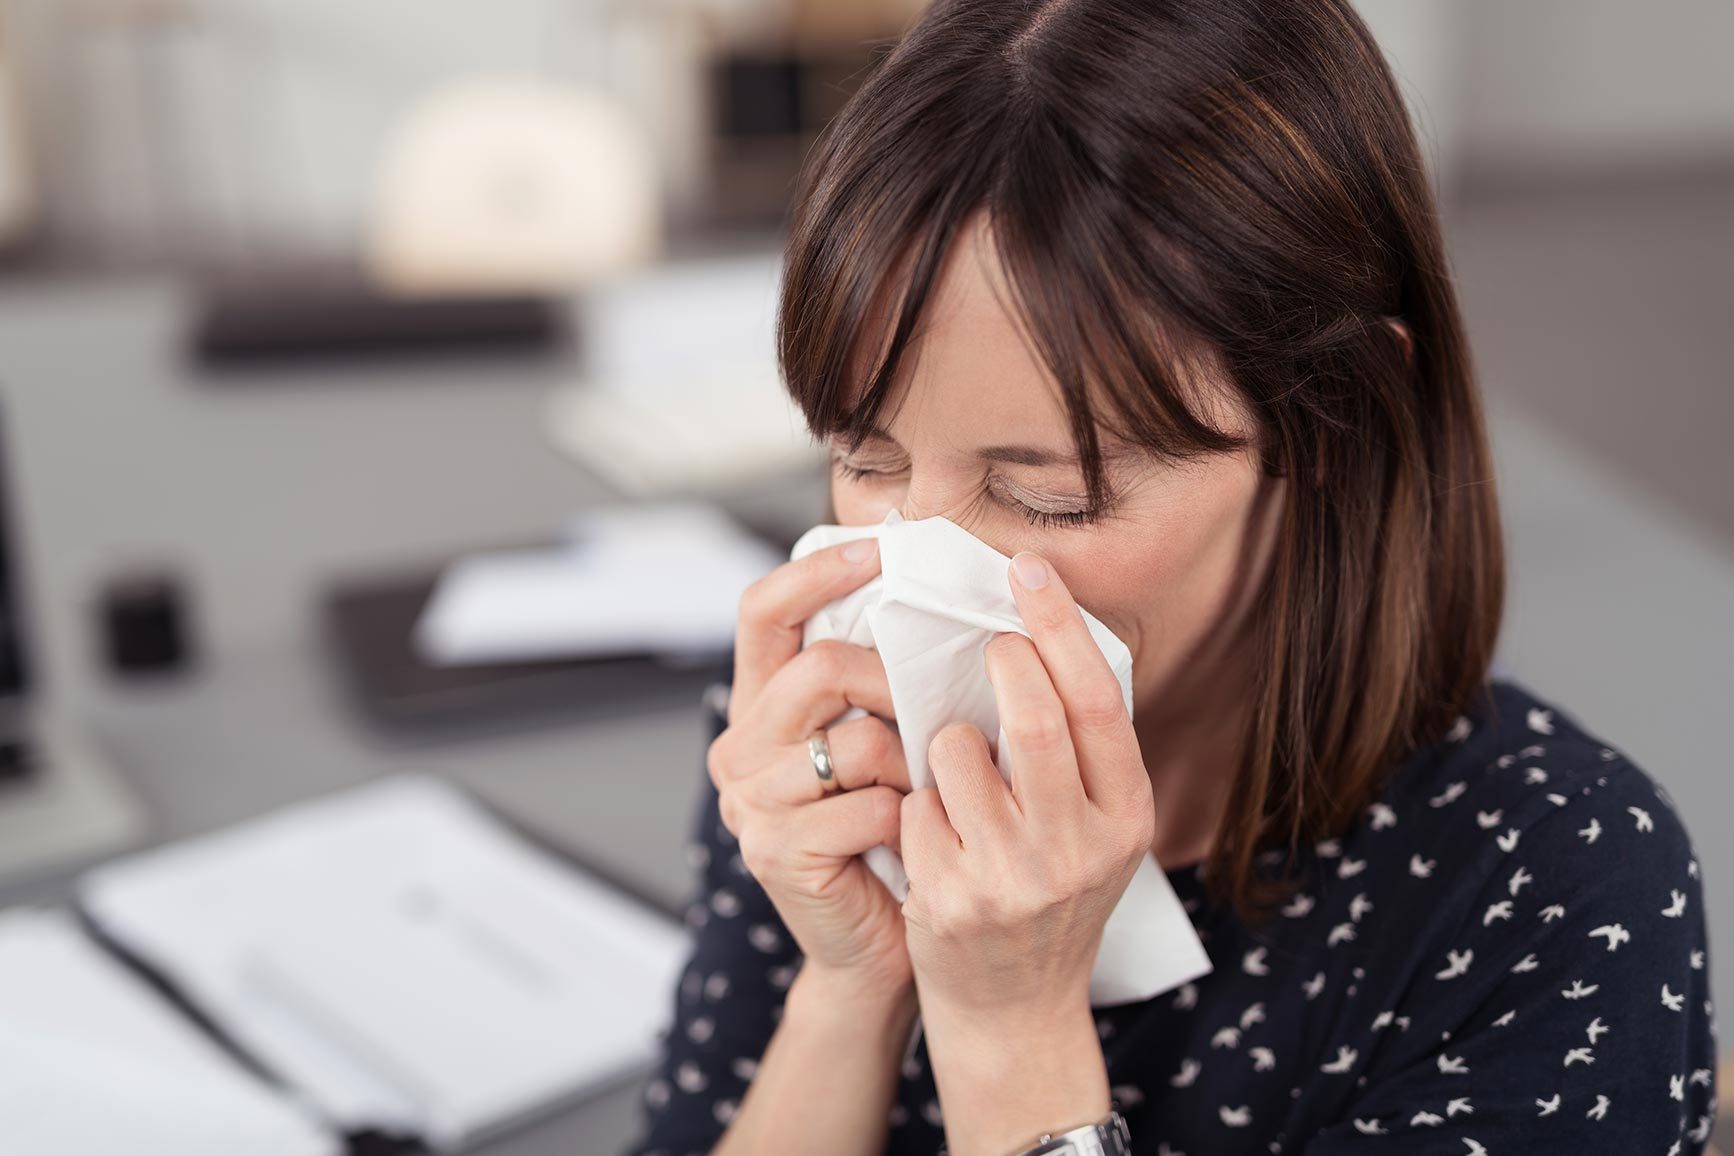 Woman blowing nose into tissue